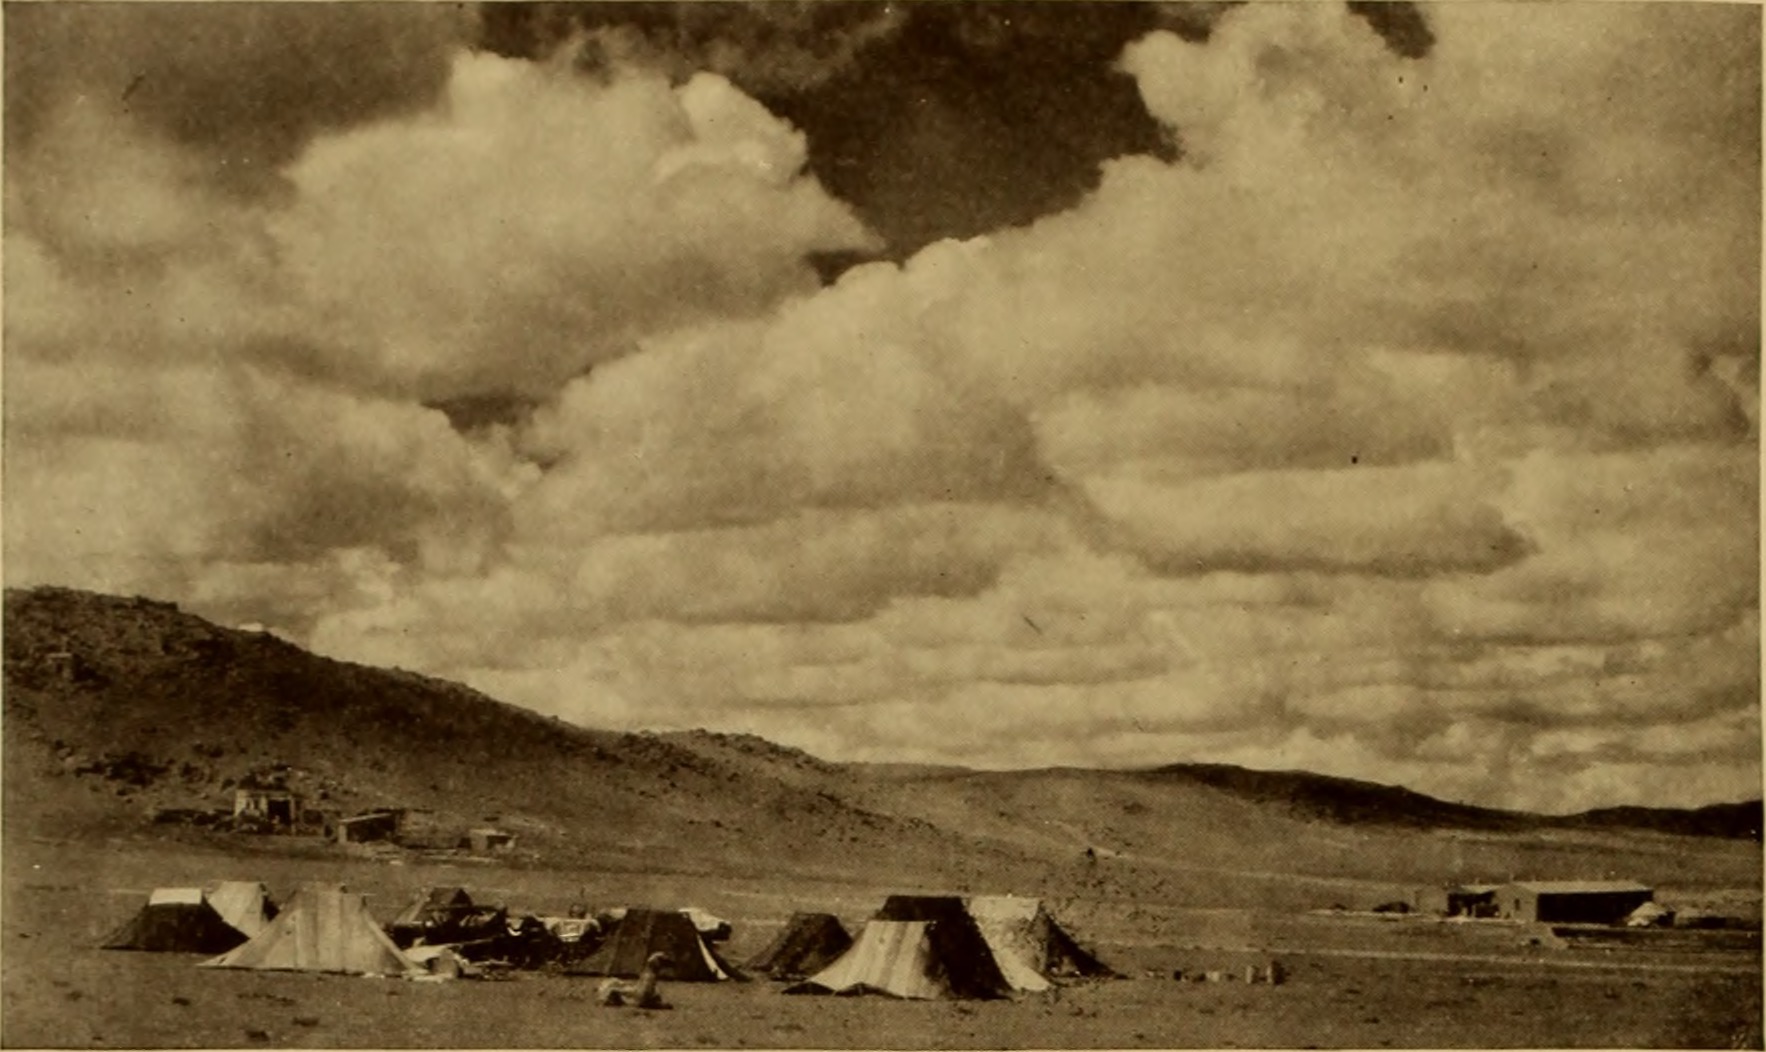 The Central Asiatic Expedition in the Gobi Desert of Mongolia, The American Museum of Natural History (1931)